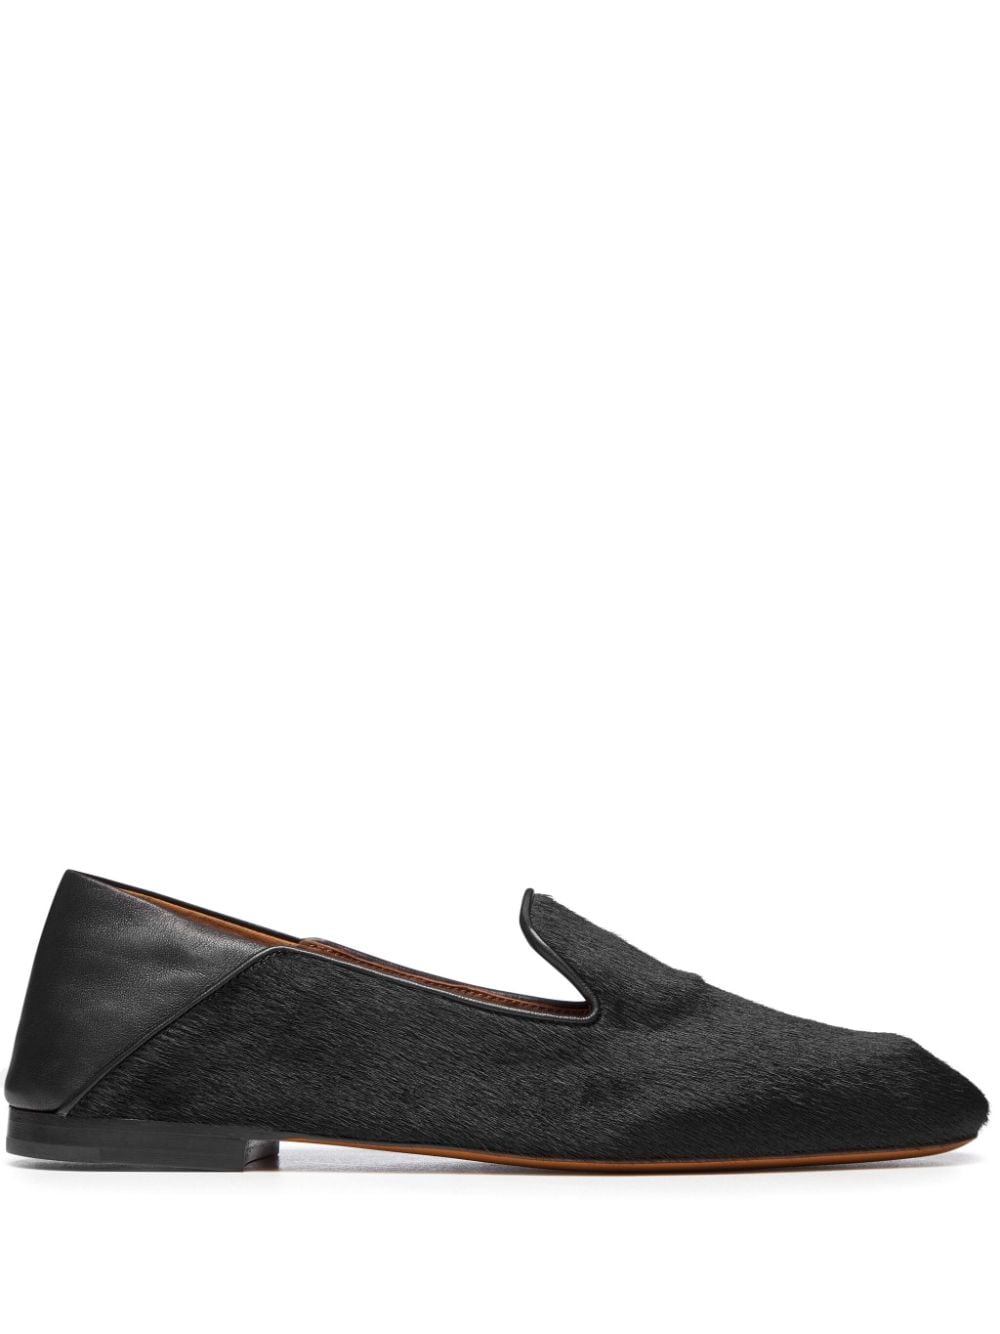 Wales Bonner Symphony Leather Flat Slippers In Brown